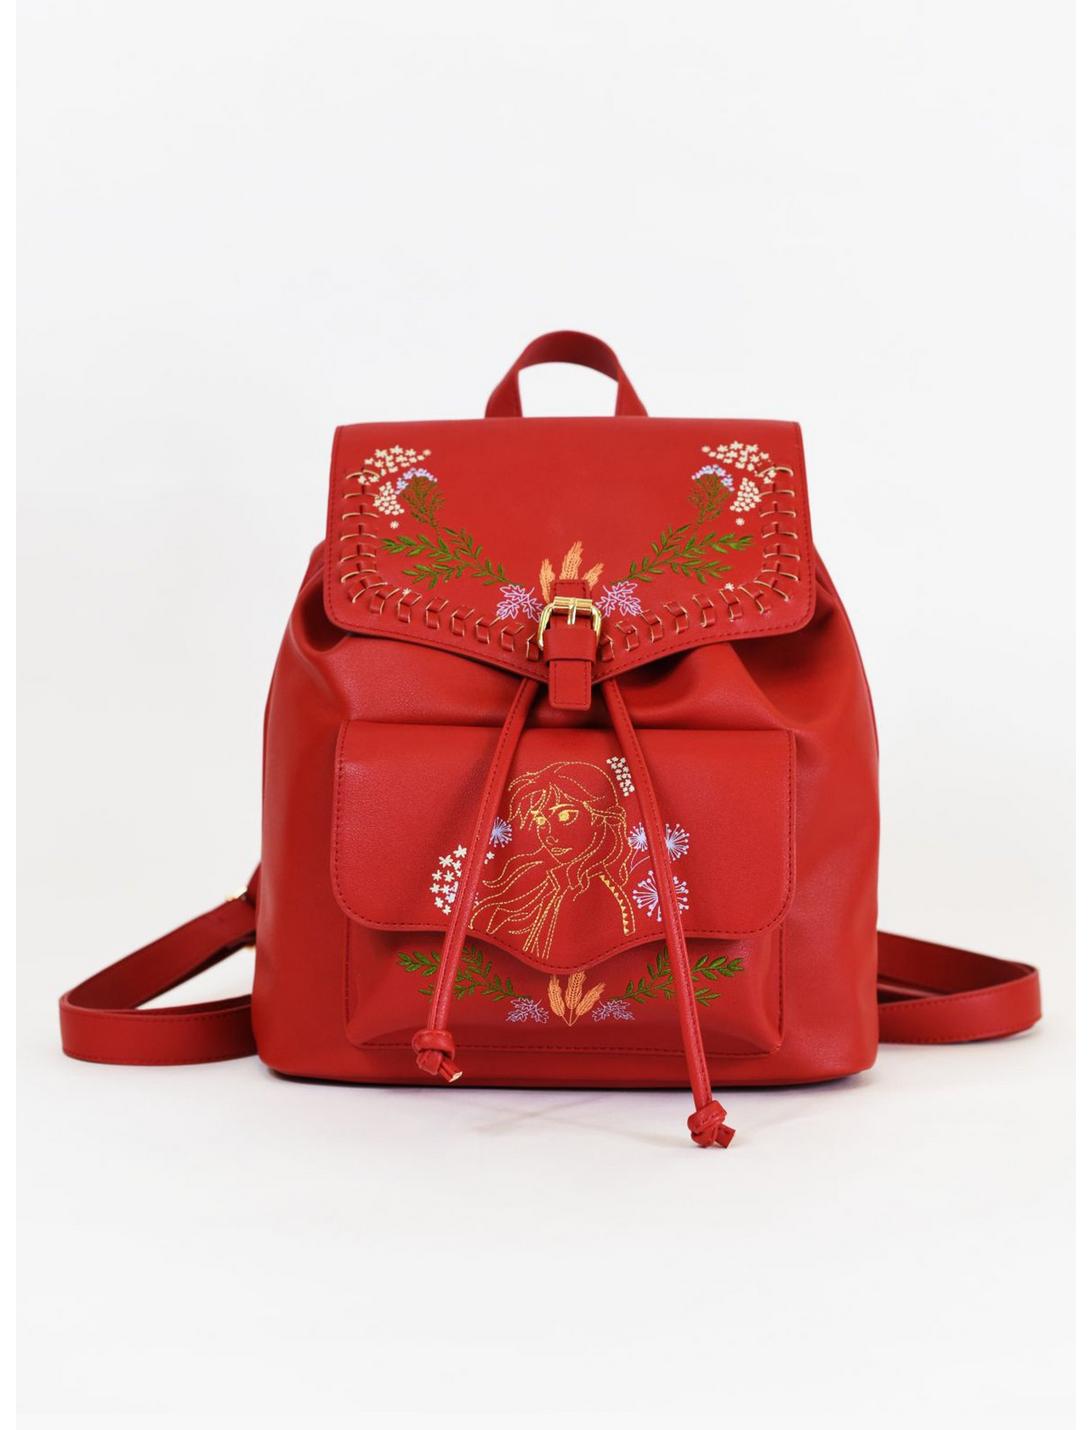 Danielle Nicole Disney Frozen 2 Anna Nature Backpack Red, , hi-res